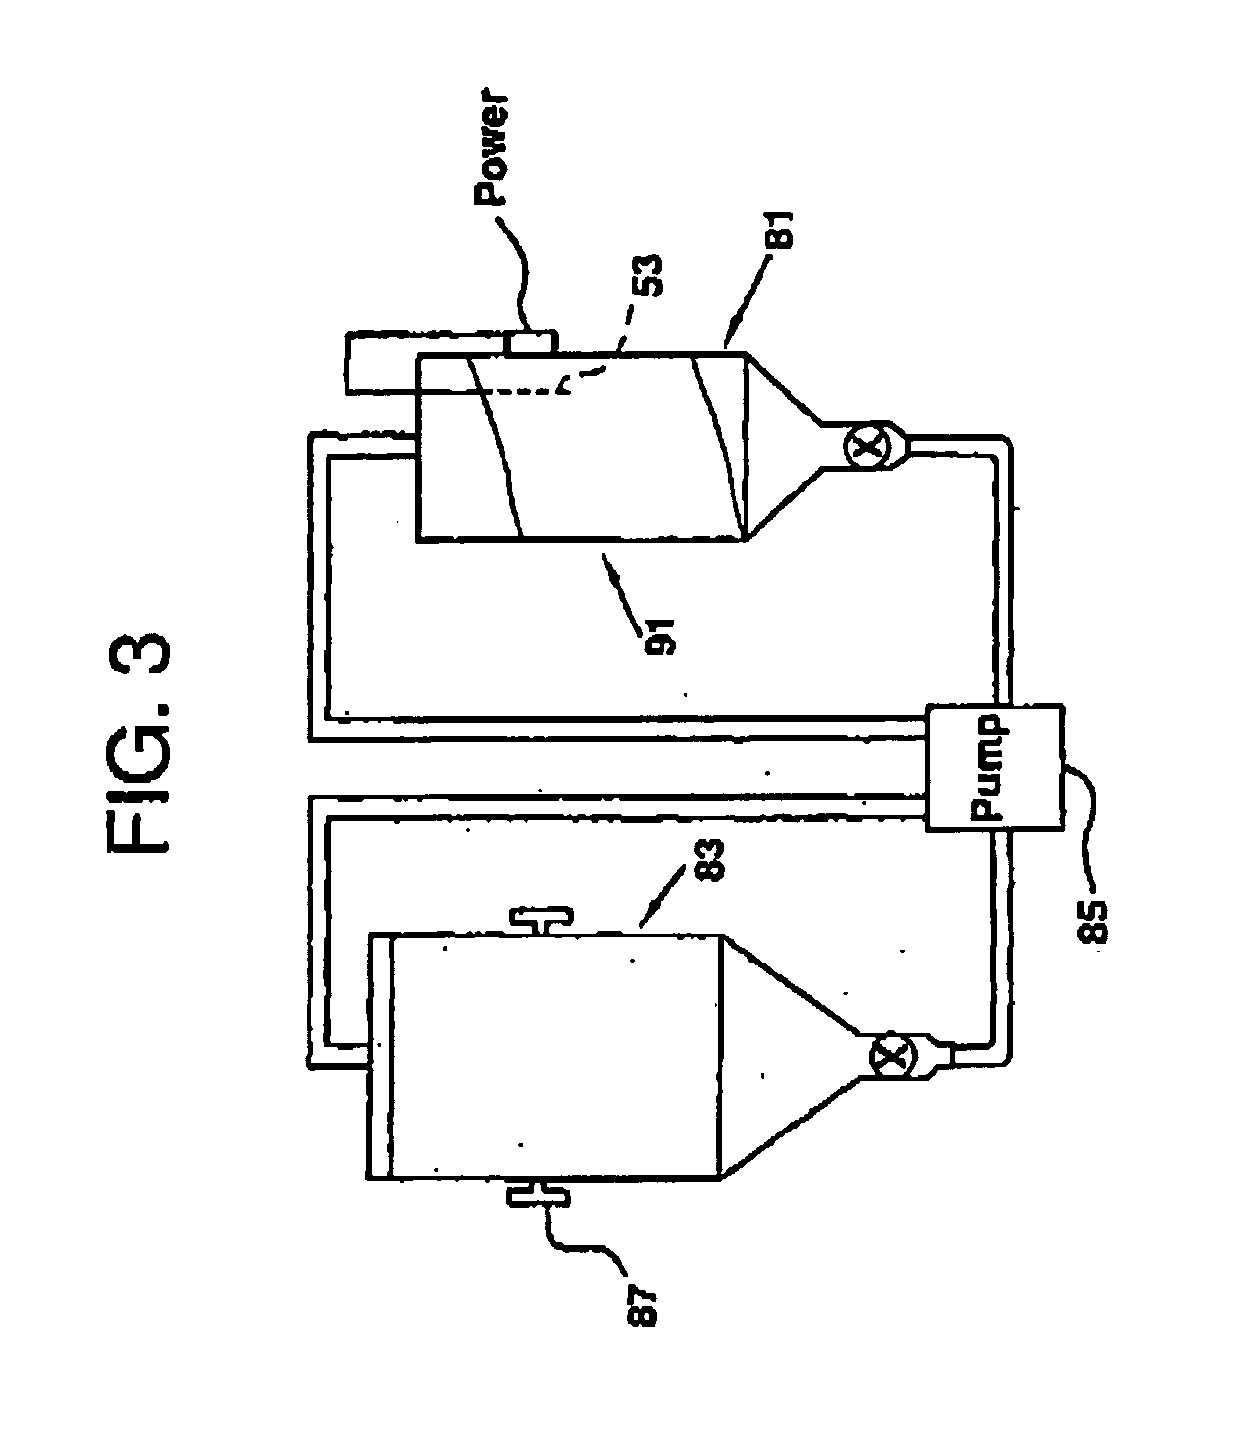 Method for making herbal extracts using percolation